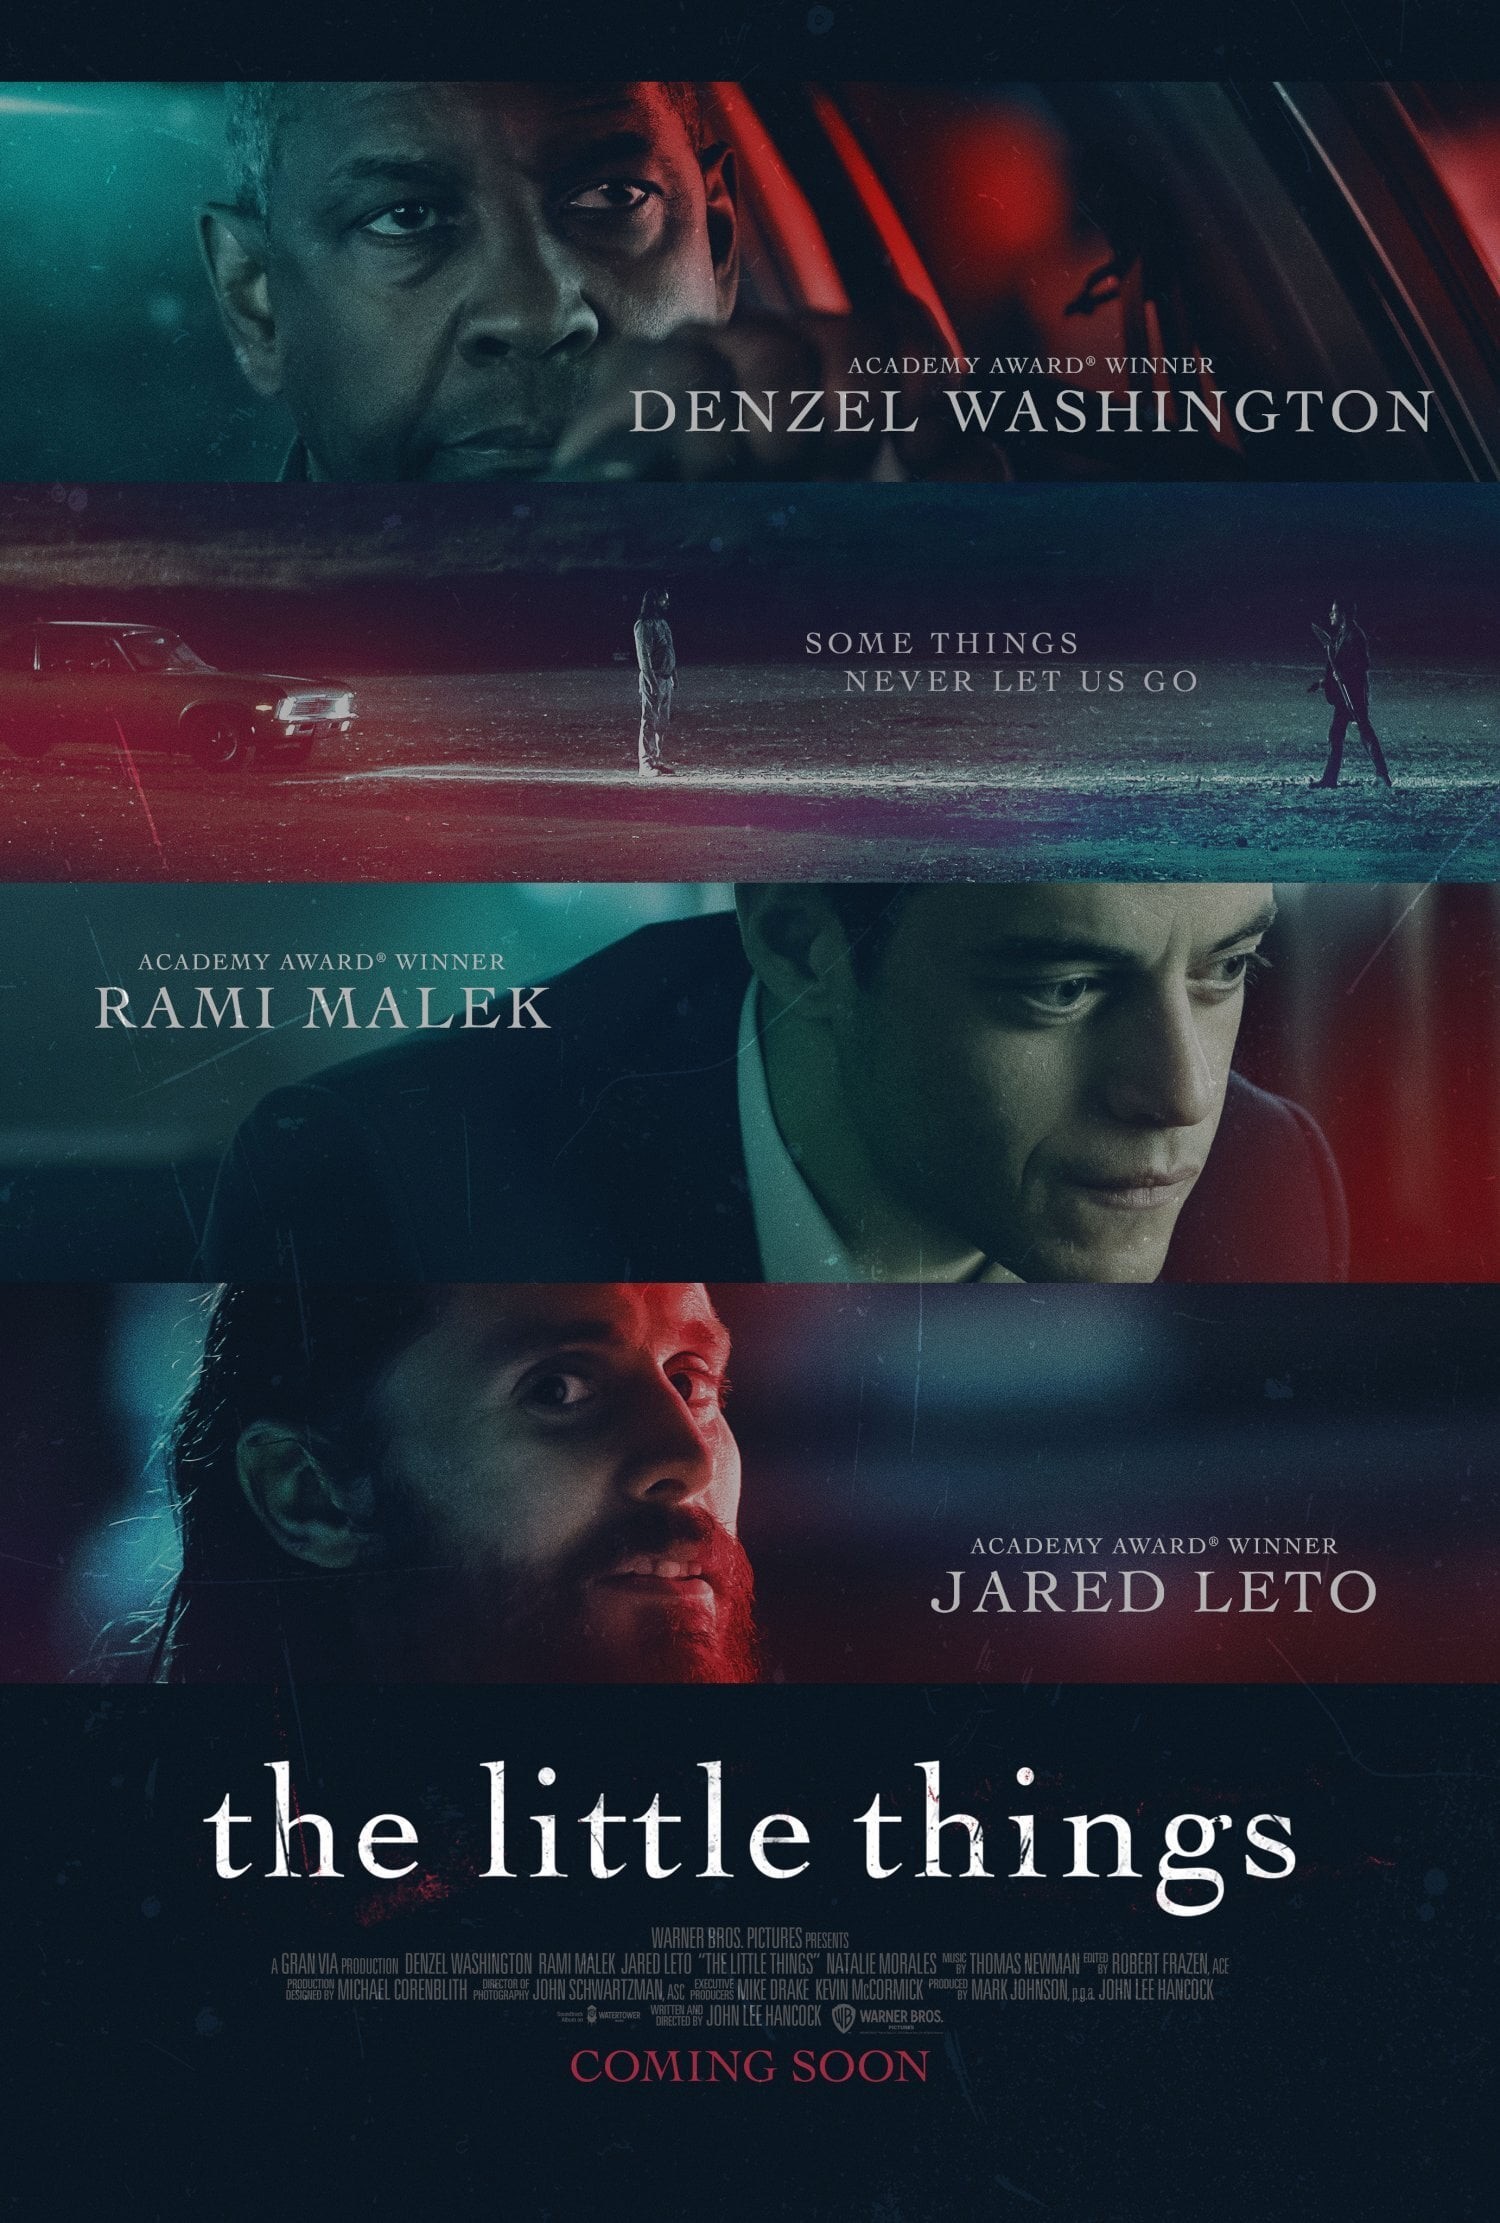 The Little Things) 2021 | FULL MOVIE ONLINE (1080p) | (The Little Things)  2021 : 720p Online